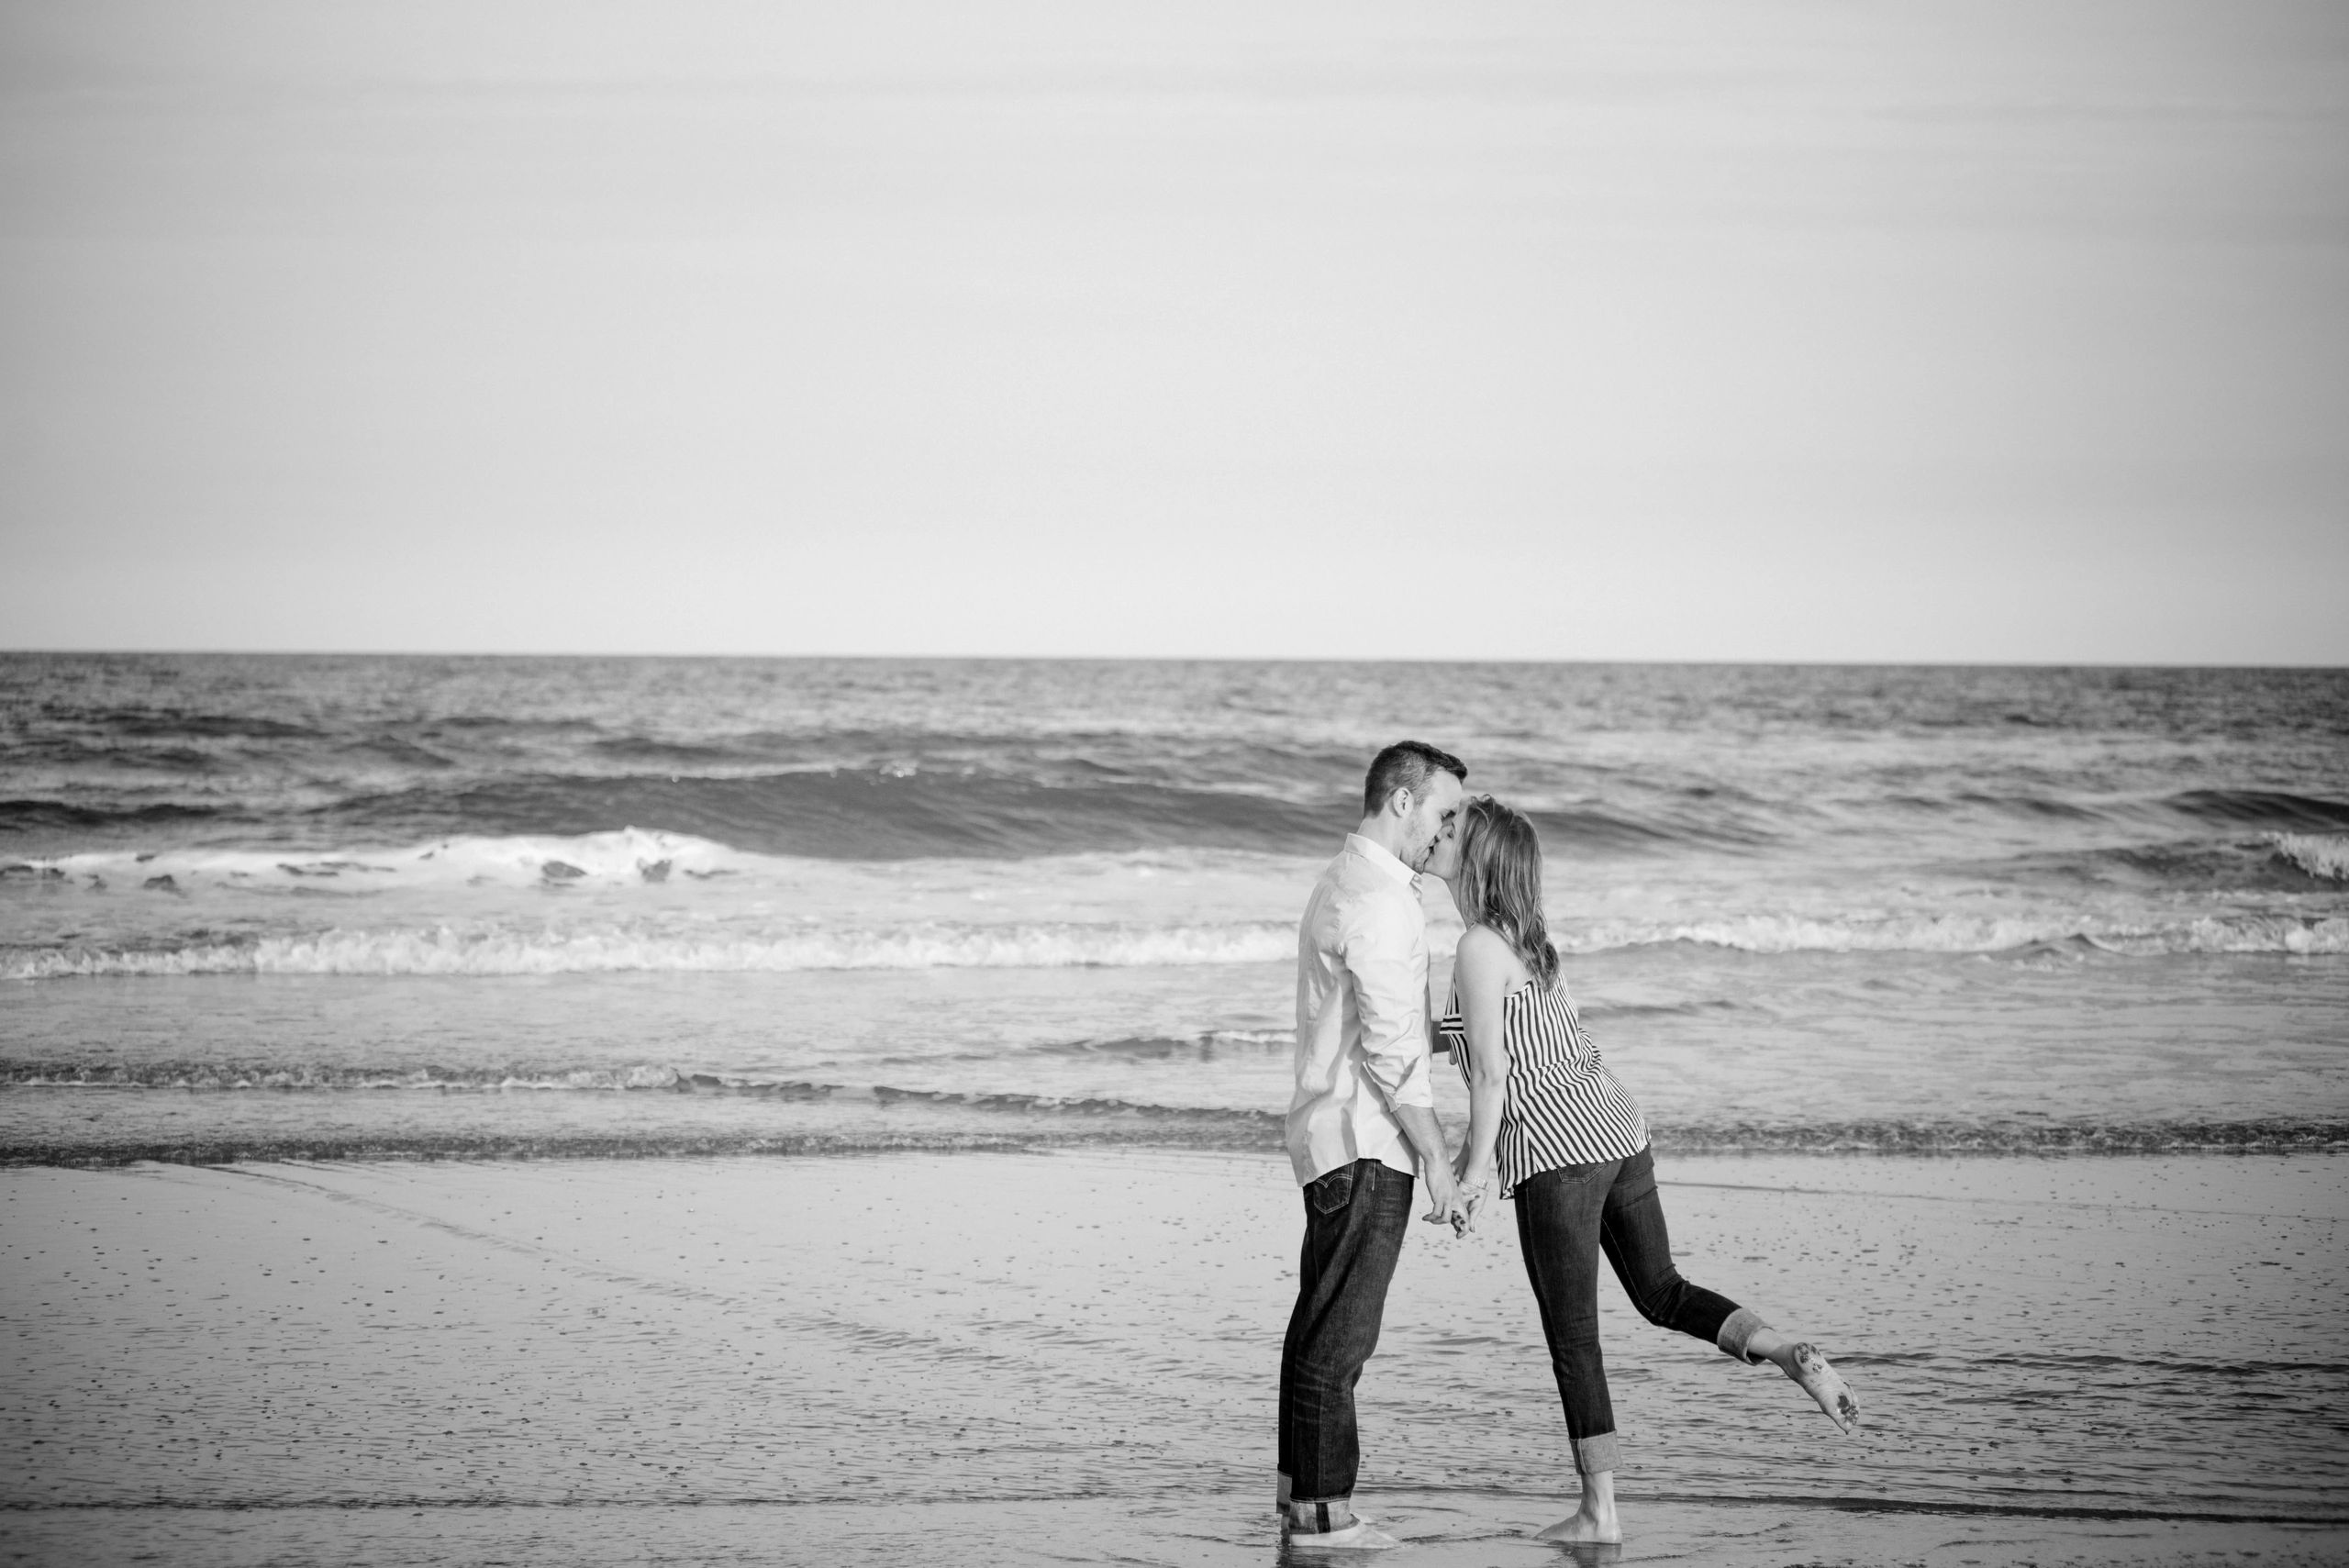 Engagement photography taken at the Jersey shore in Avalon, NJ